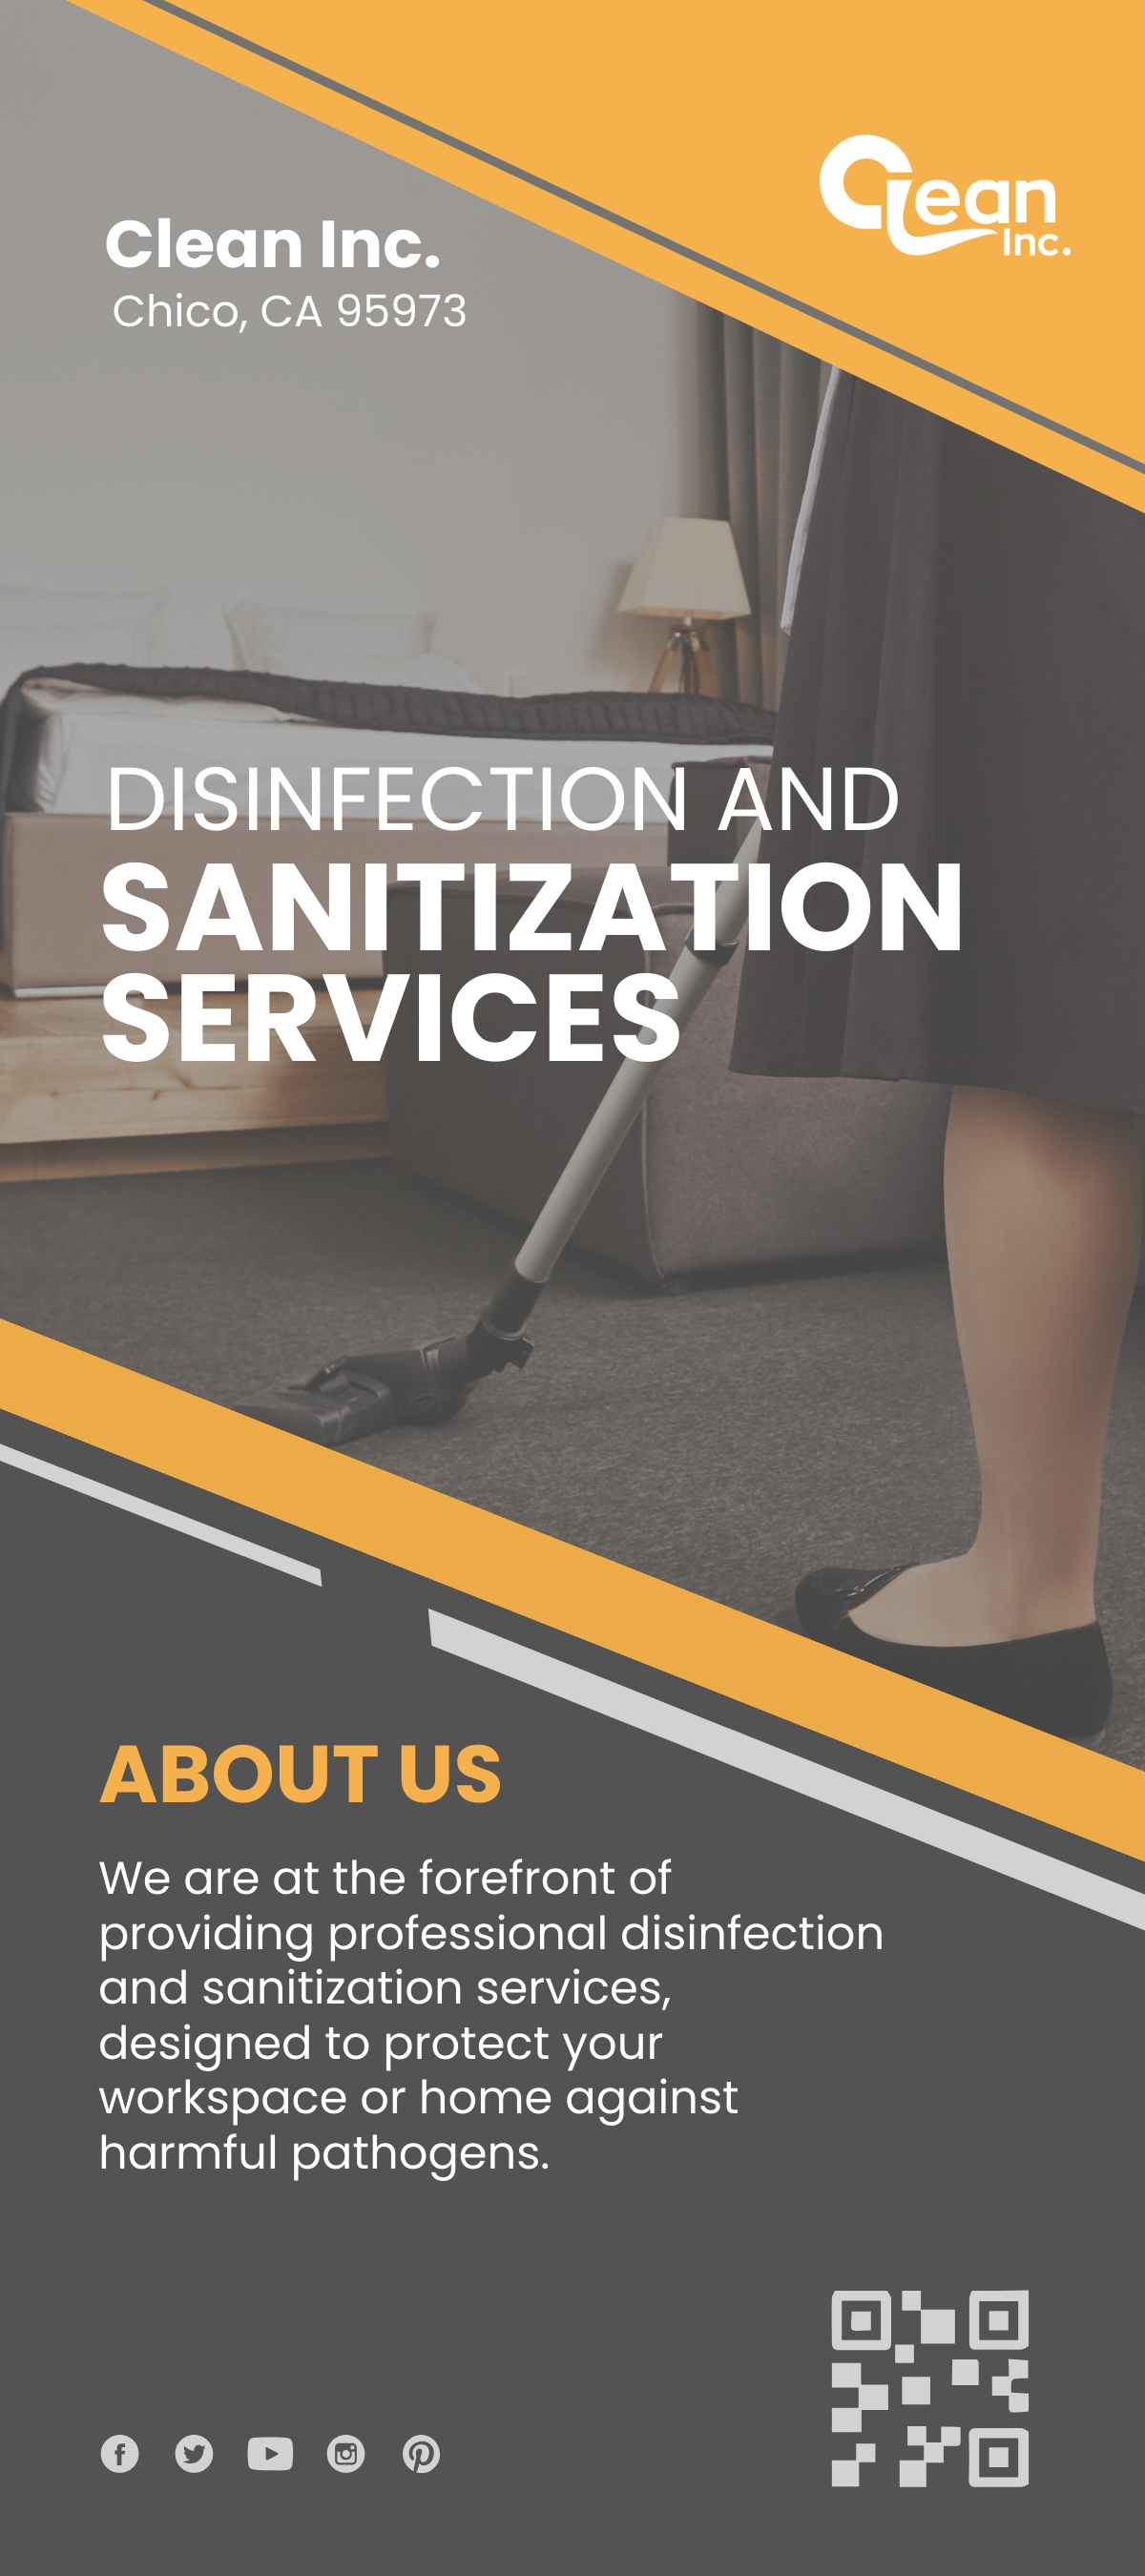 Disinfection and Sanitization Services Rack Card